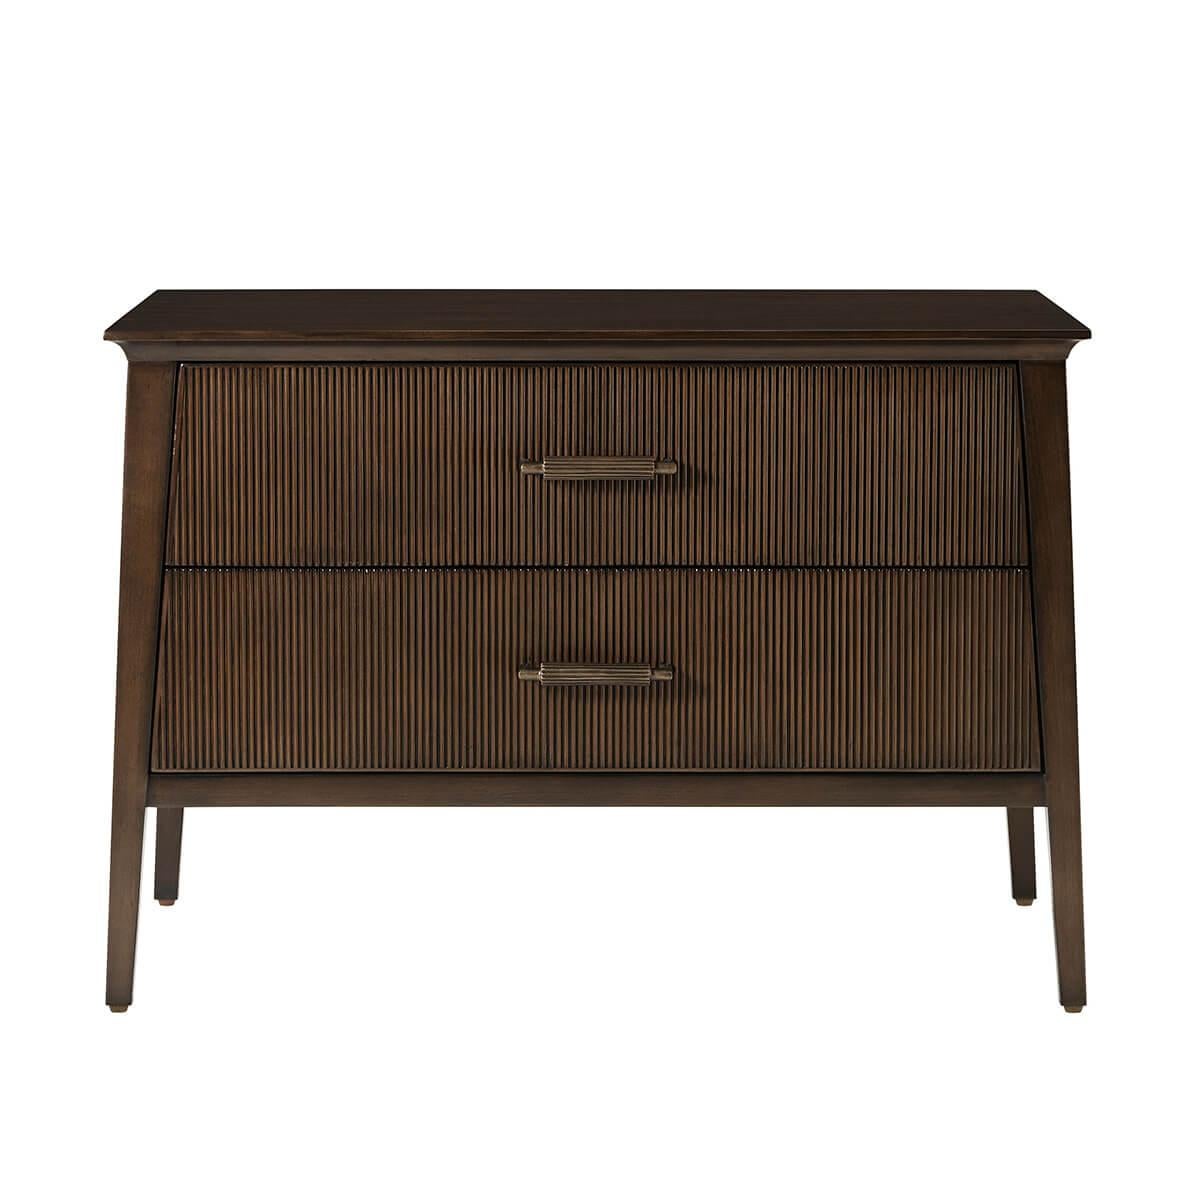 Featuring a sophisticated tapered silhouette with two reeded drawer fronts. The custom forged hardware, finished in a dark rubbed bronze, echoes the reeded details throughout.

Dimensions: 32